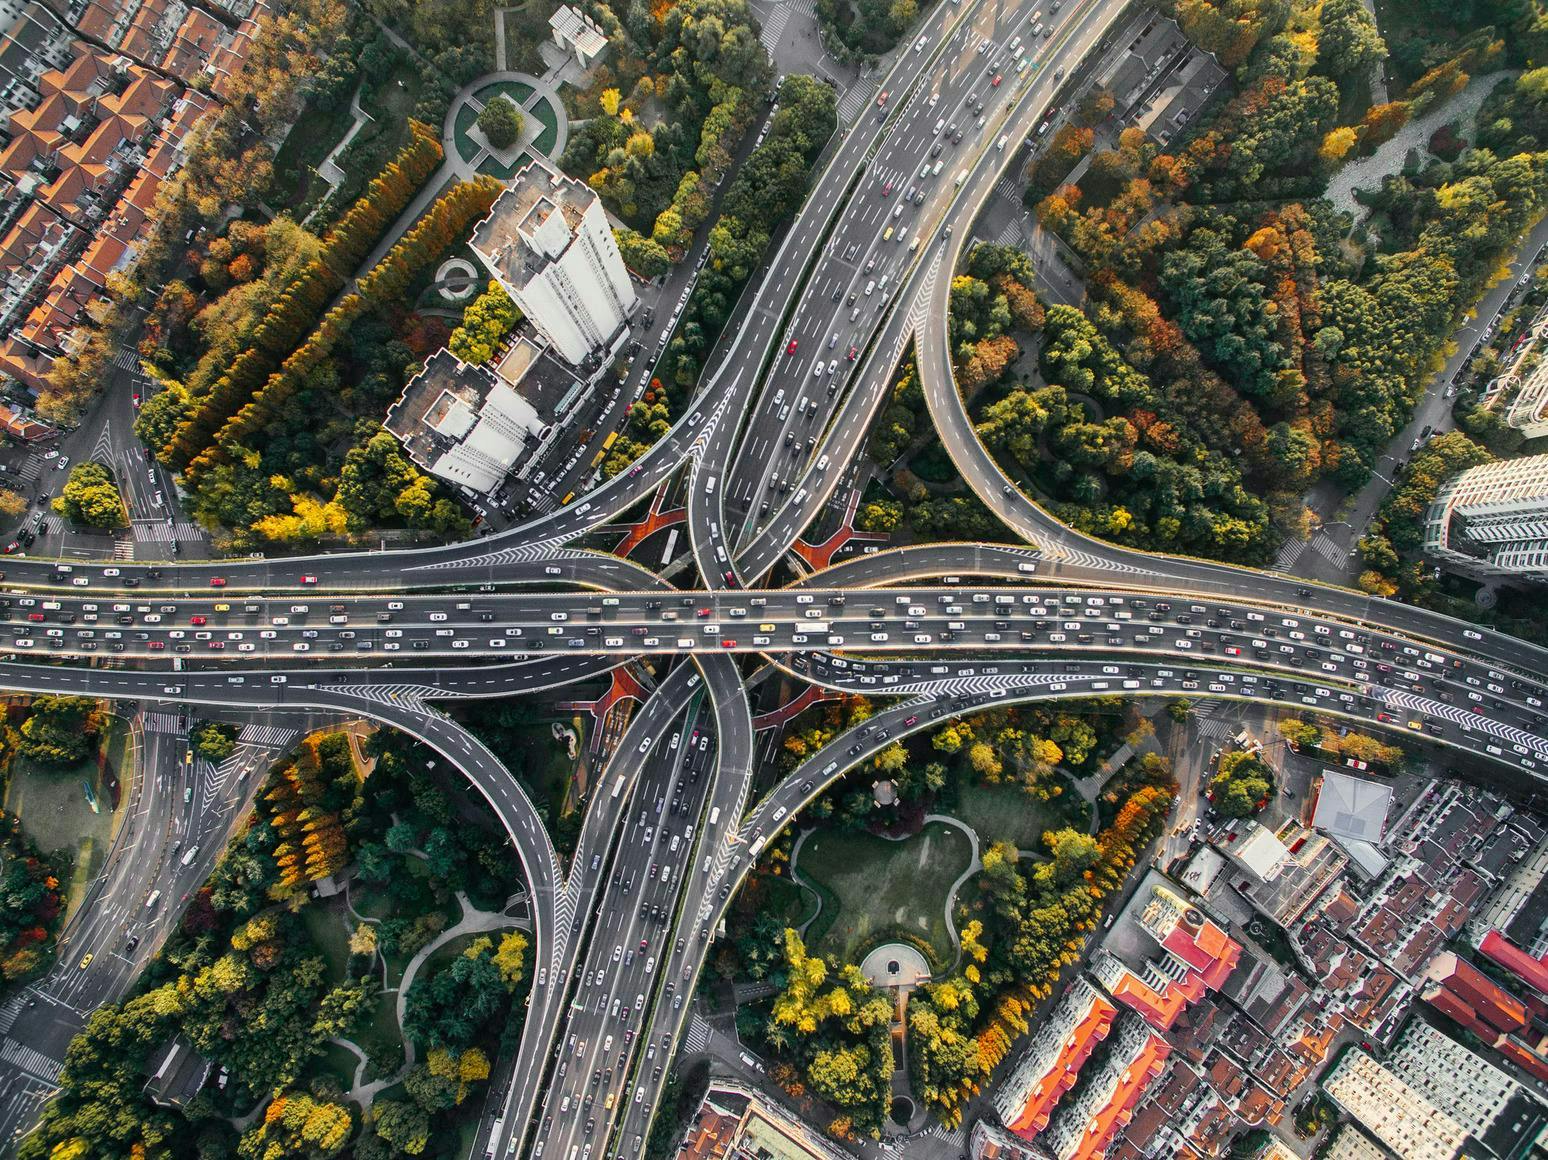 Aerial view of a sprawling, multi-layered highway interchange bustling with dense traffic amidst a mix of urban buildings and lush green spaces adorned with autumn foliage.